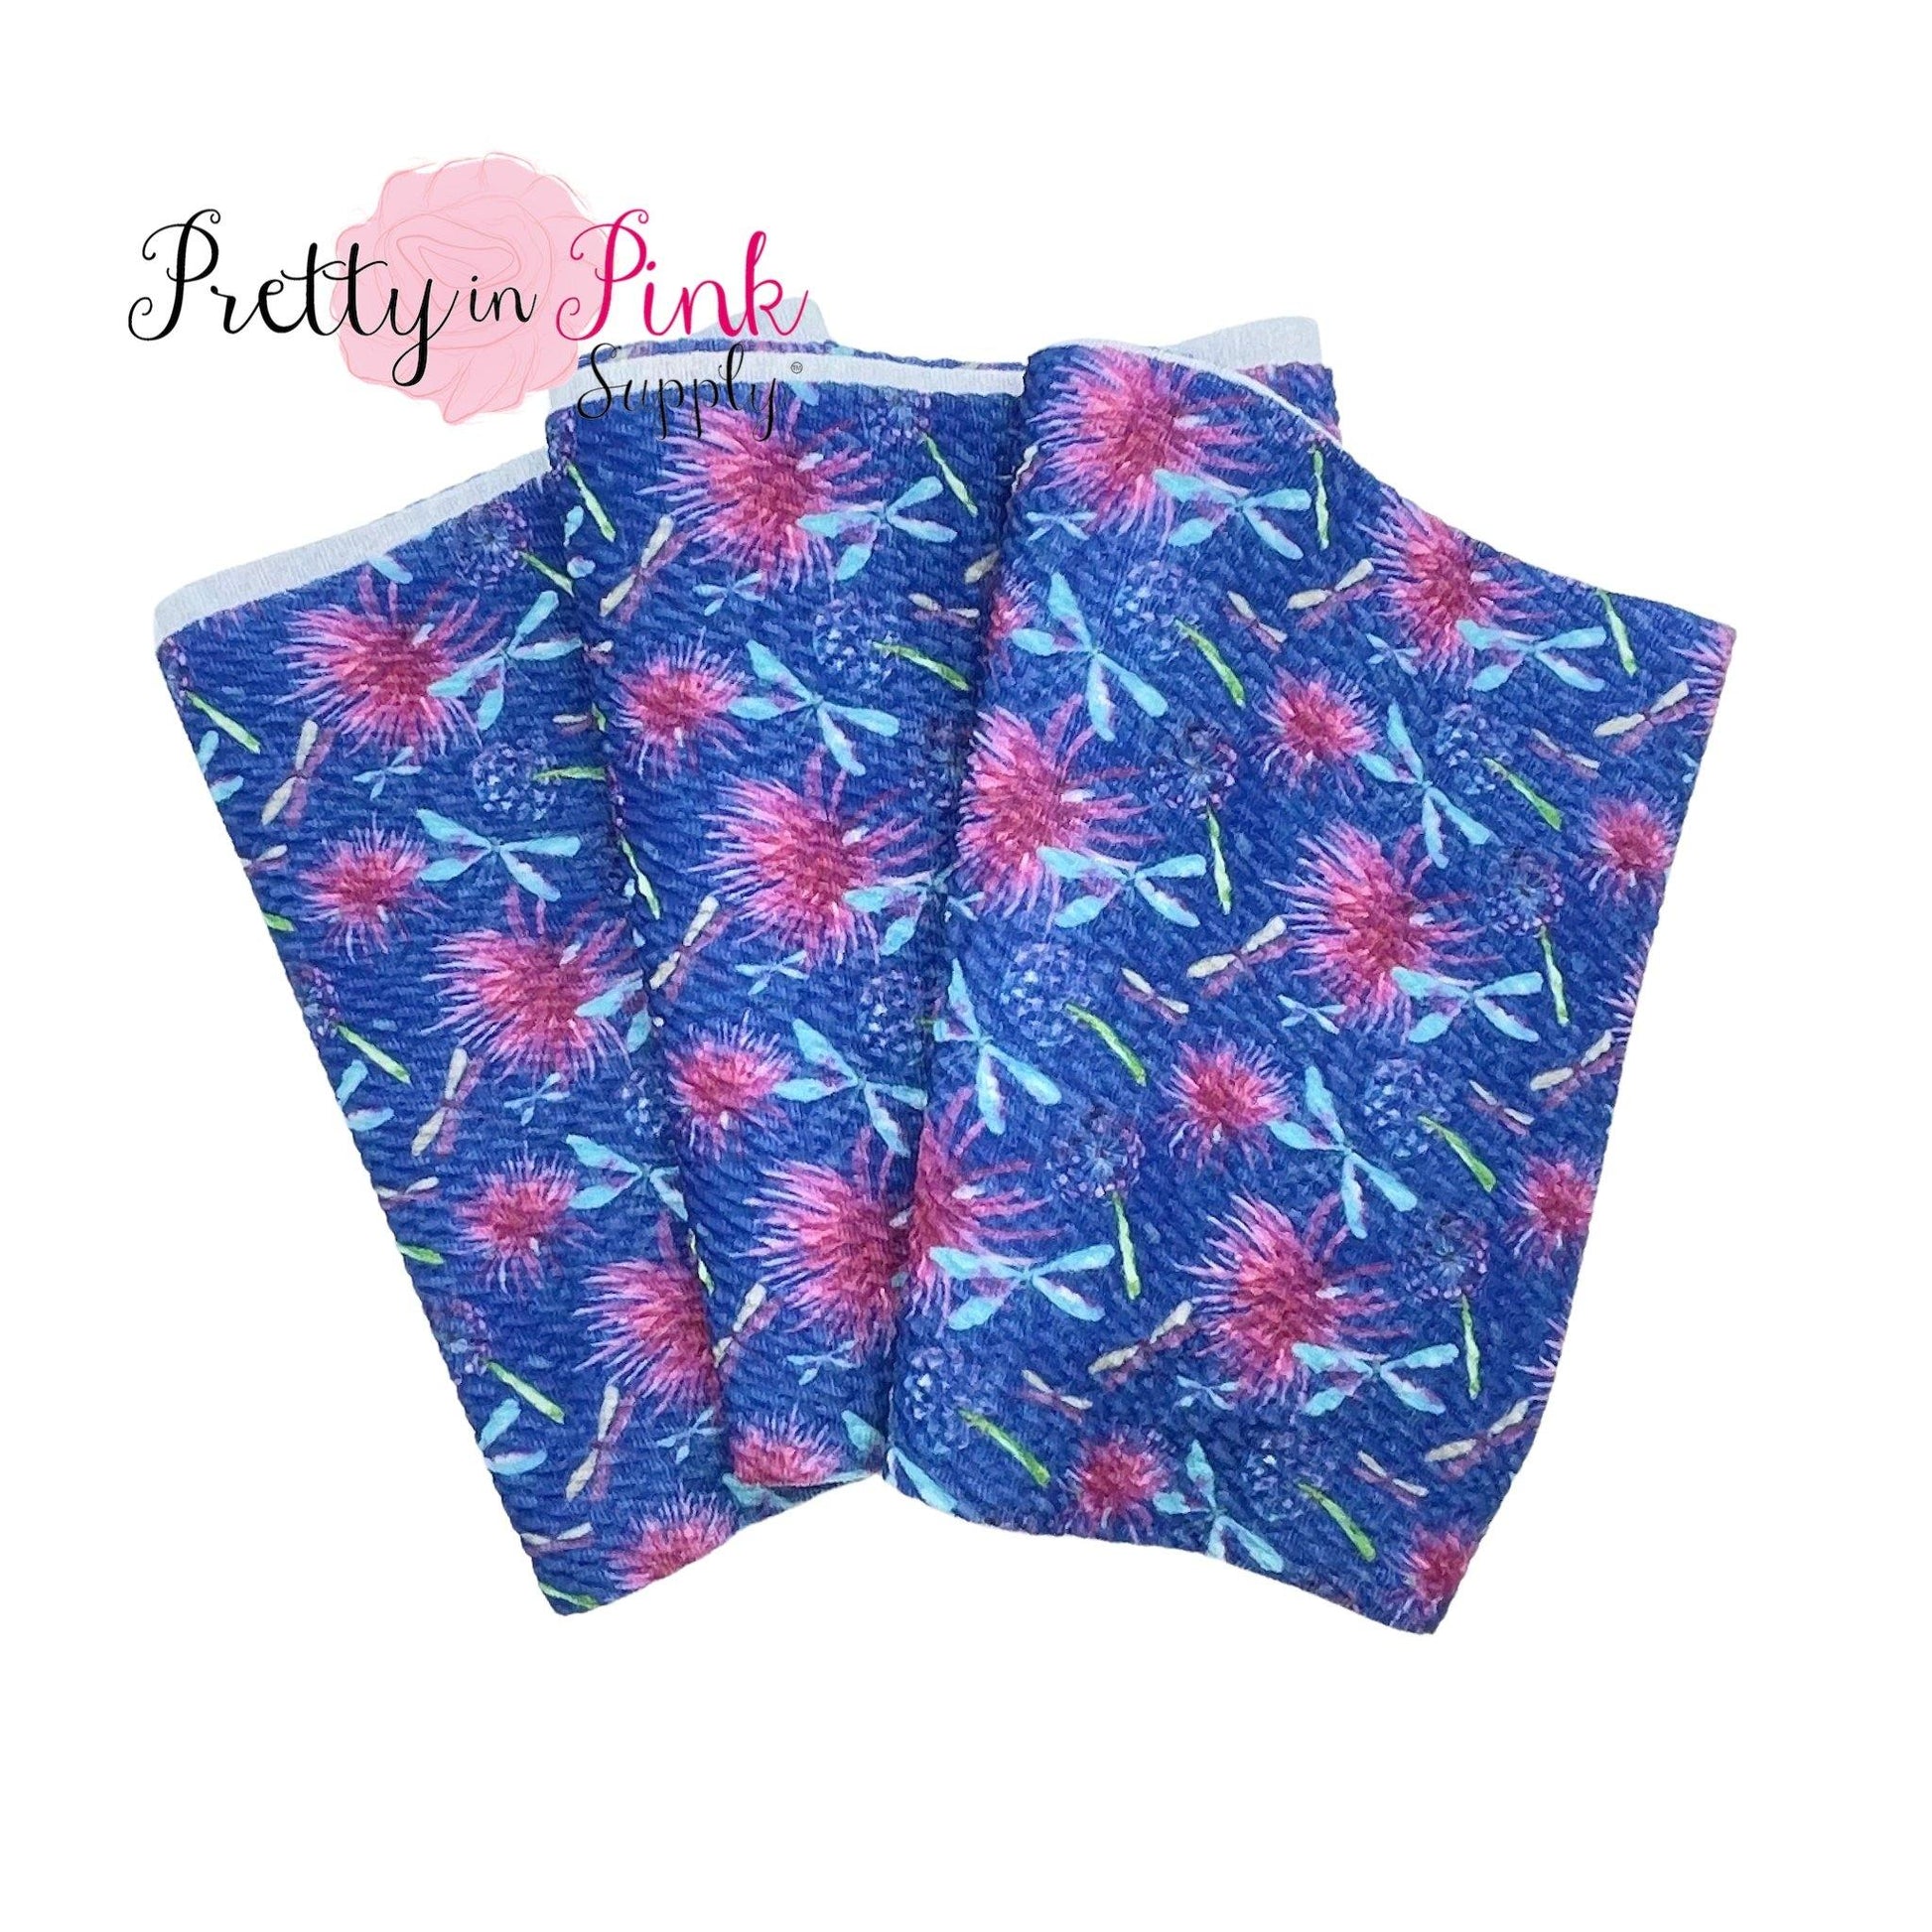 Dragonfly Wishes | Liverpool Fabric - Pretty in Pink Supply